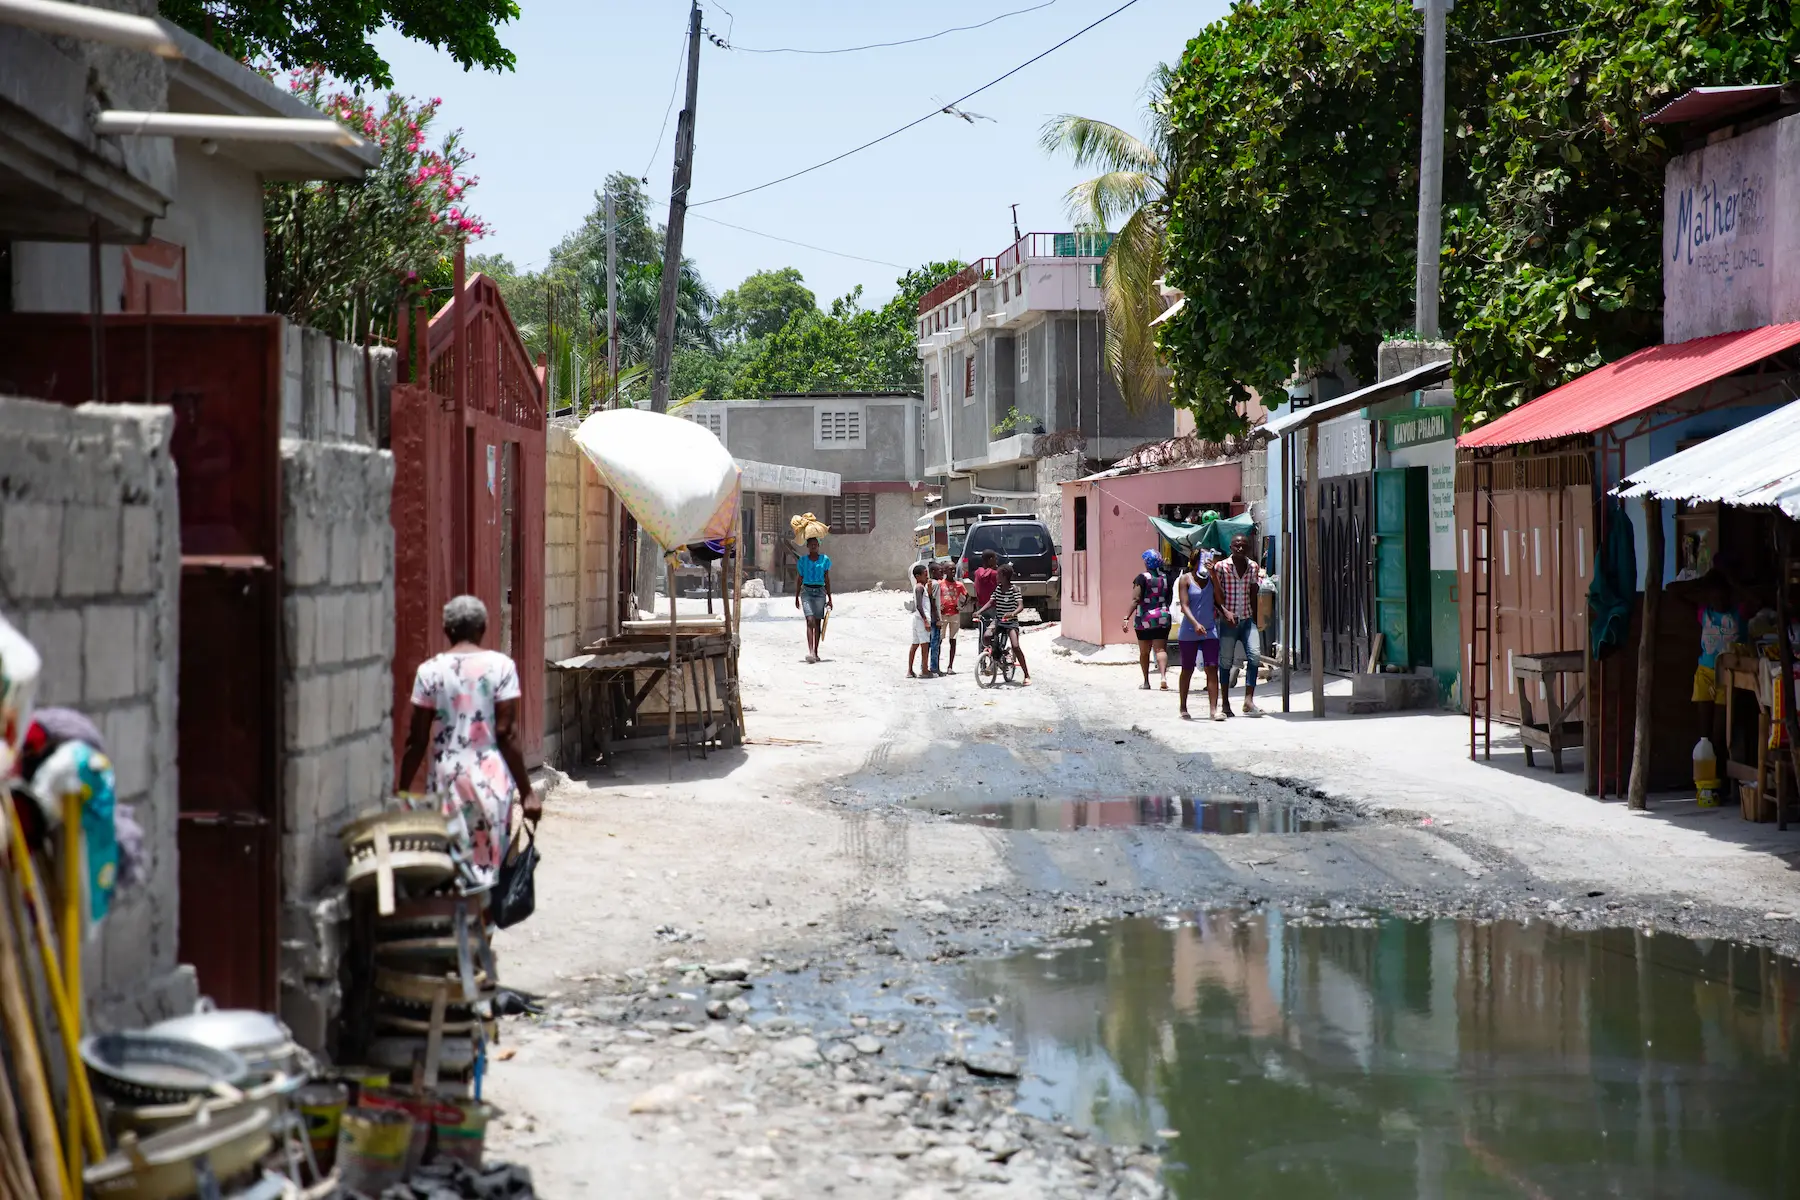 Cité Soleil, a commune located within Port-au-Prince, is one of the lowest-income and most densely-populated communities in Haiti, and is prone to flood, violence, and disease outbreaks.